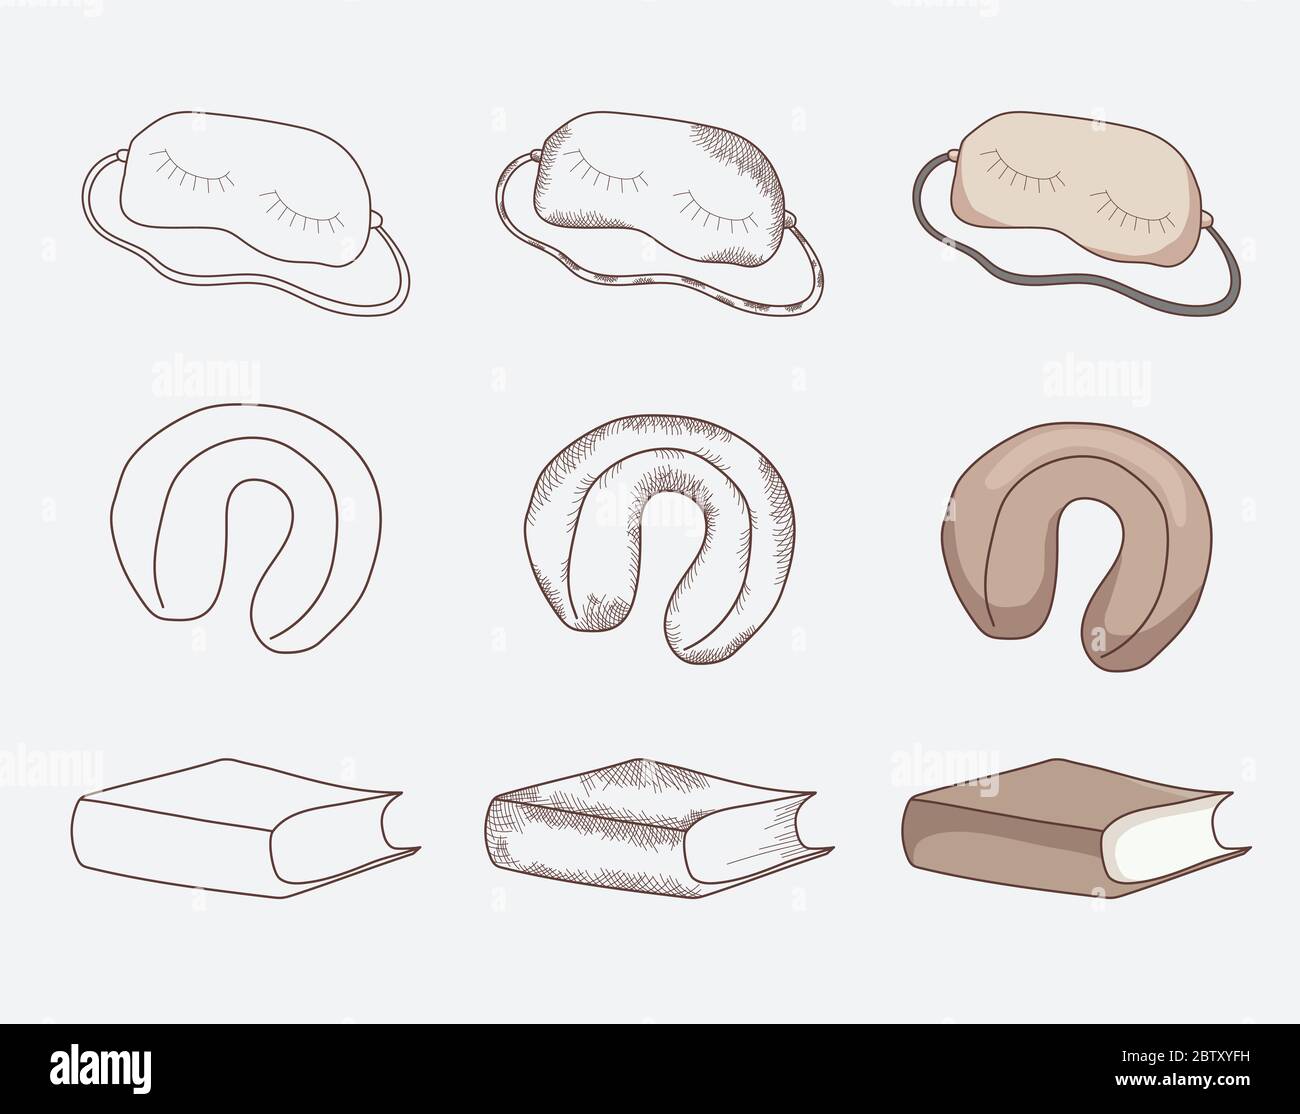 Items for travel and sleep on the road, blindfold, pillow and book. Different design options - contour, shading, vintage, contour and color. Vector Stock Vector